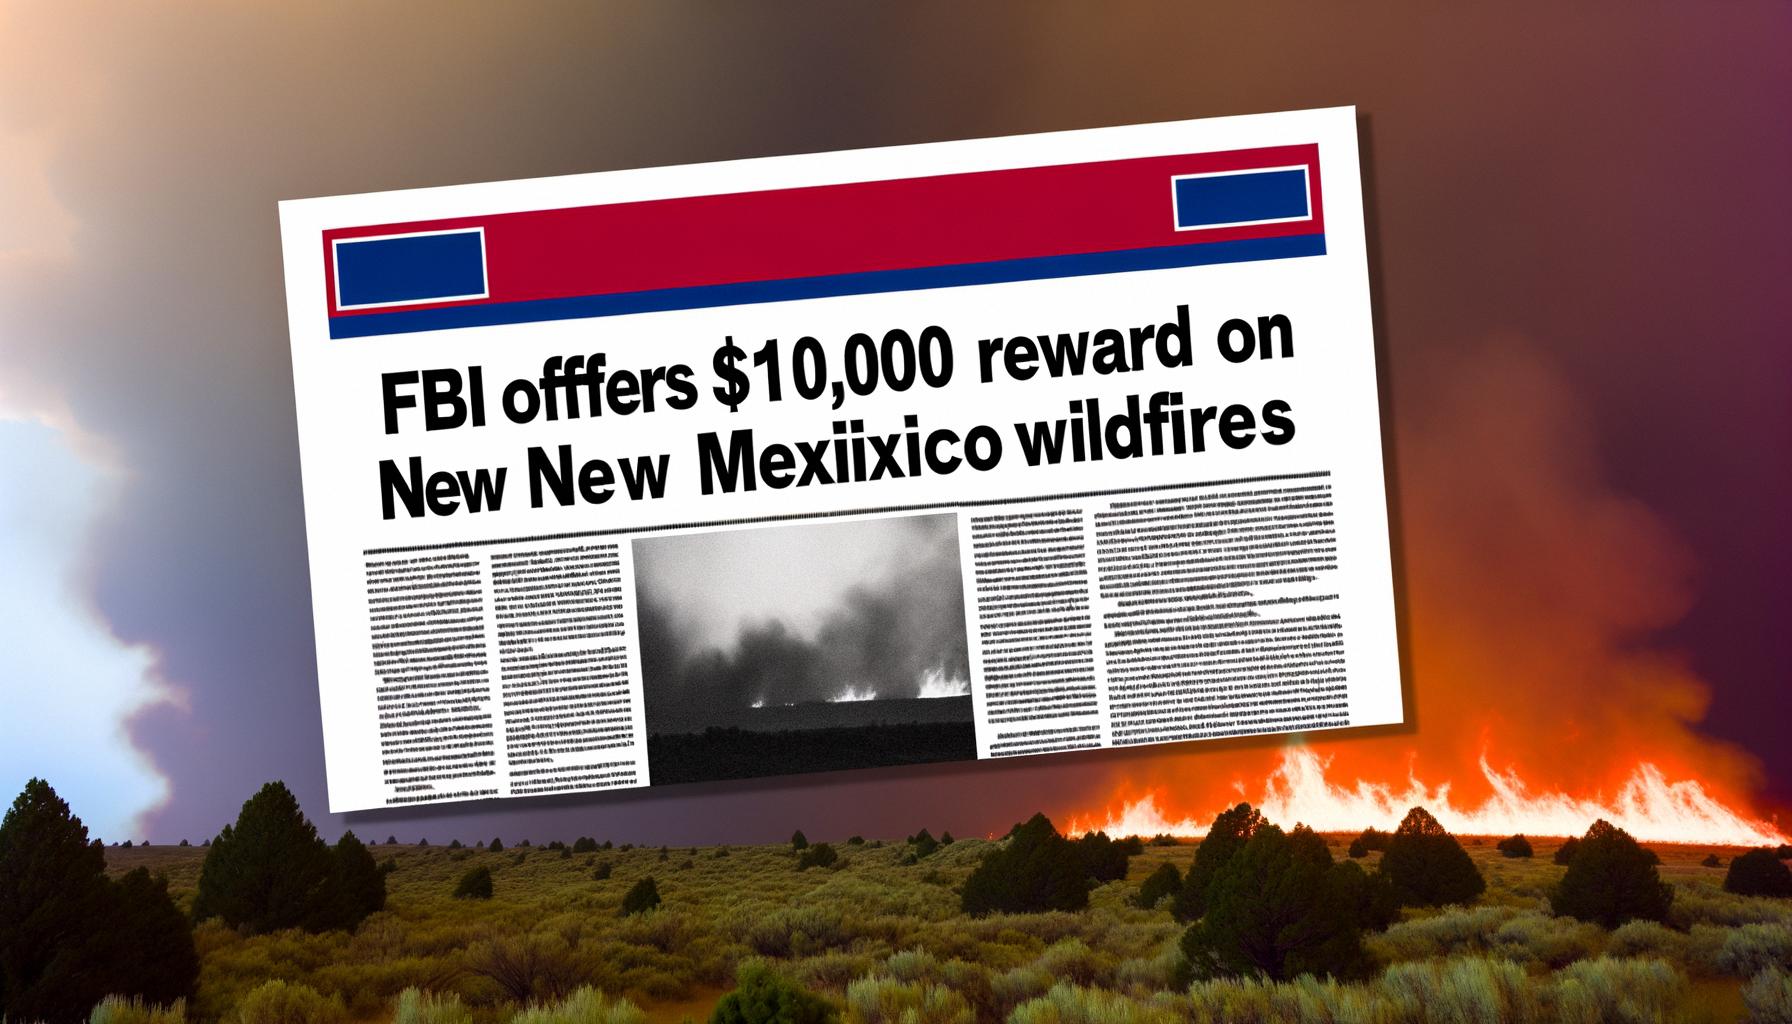 FBI offers $10,000 reward for information on deadly New Mexico wildfires.